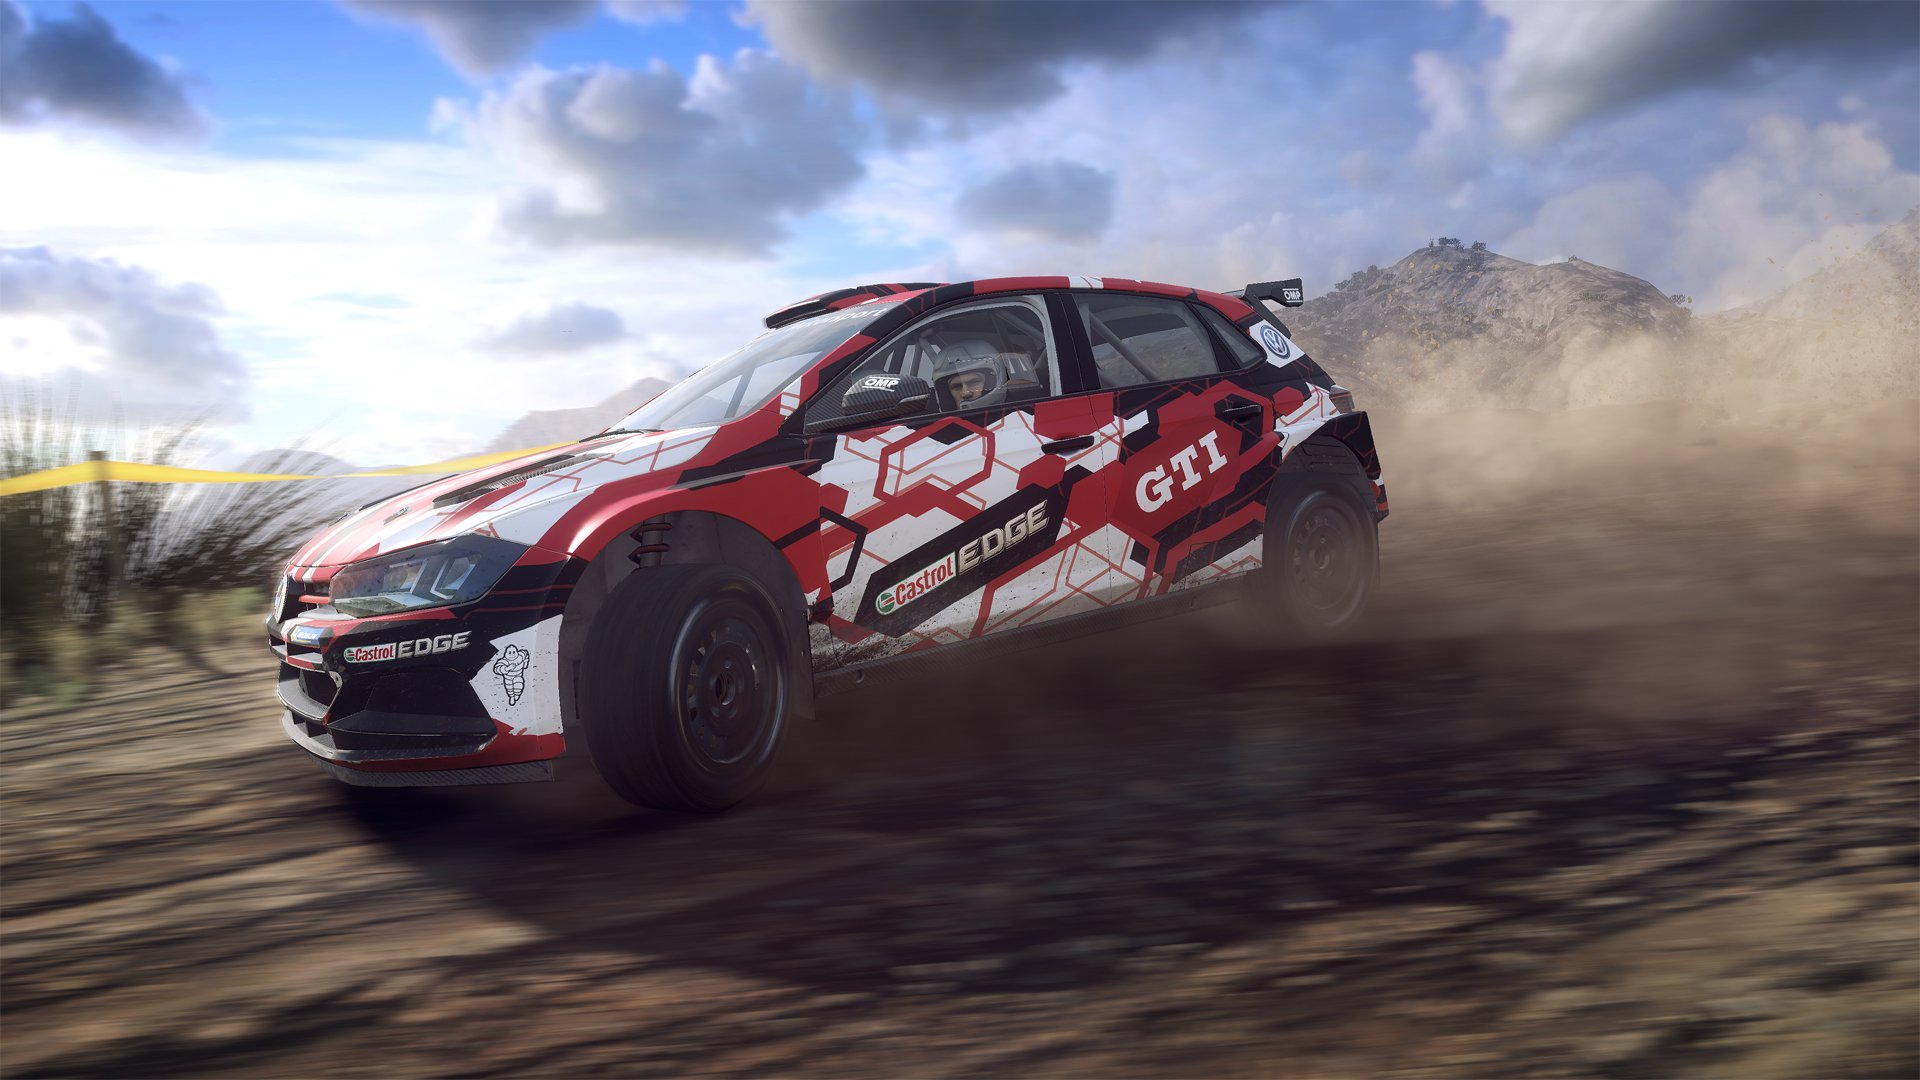 Vr rally. Dirt Rally 2 0 Volkswagen Polo. Dirt Rally 2.0. Volkswagen Polo Dirt Rally. Dirt Rally 2.0 Polo.